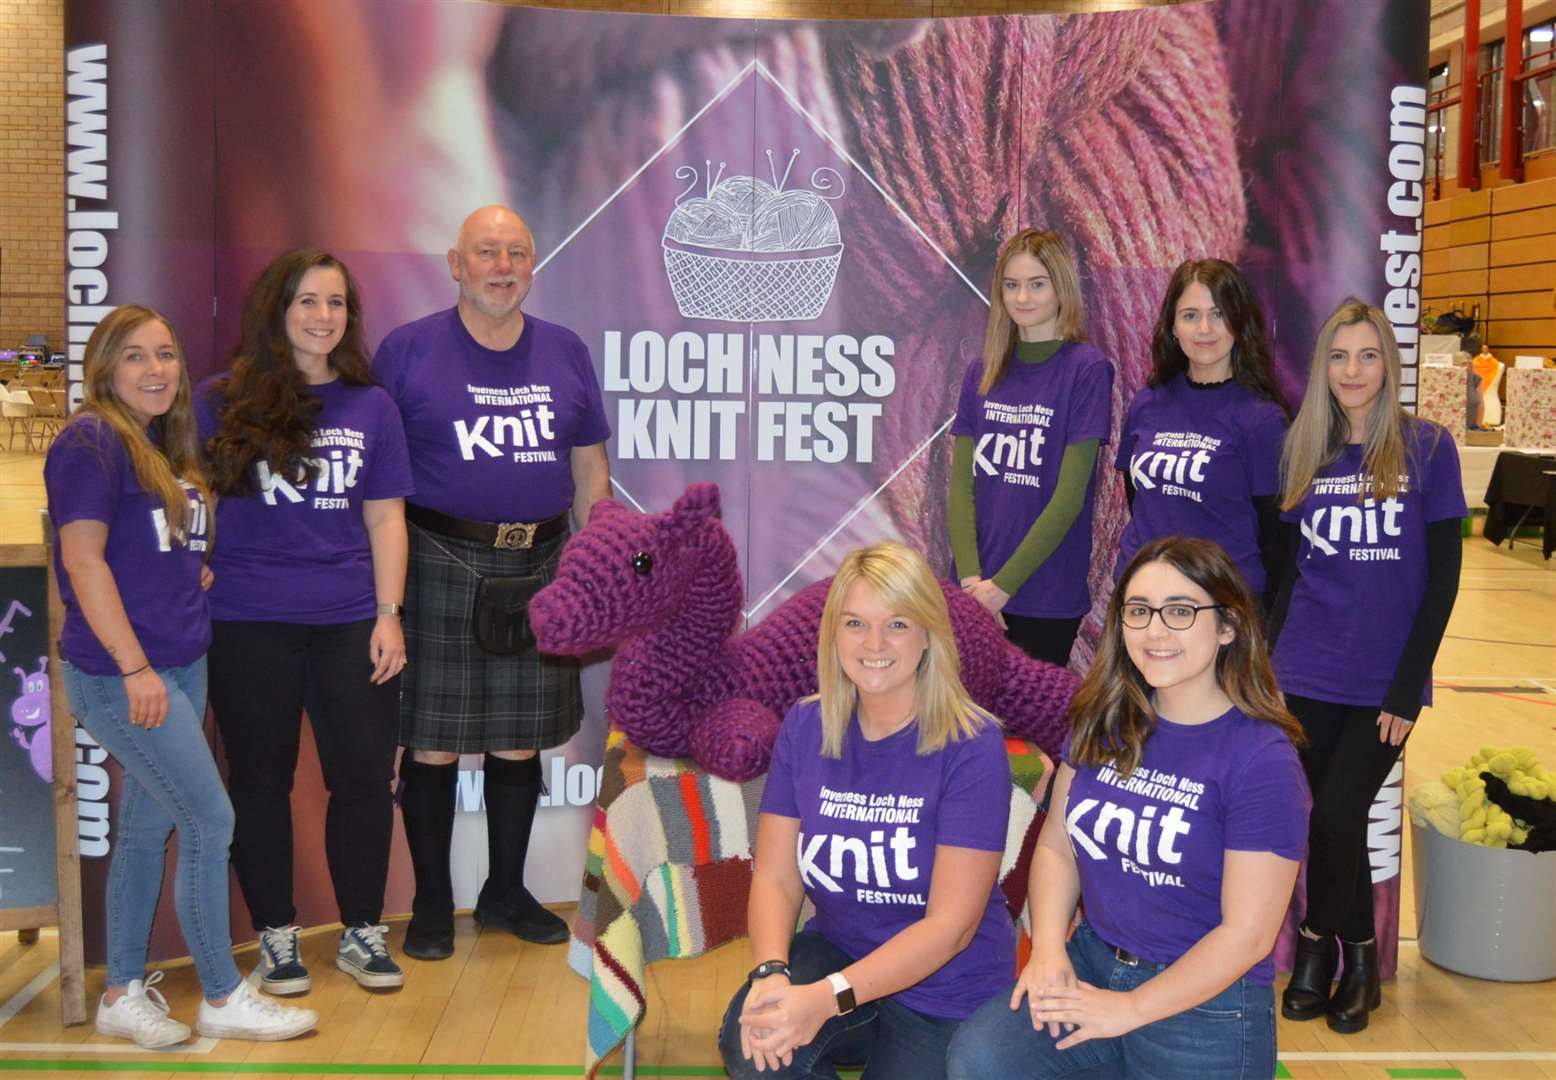 Some of the Loch Ness Knit Fest team at last year’s event.